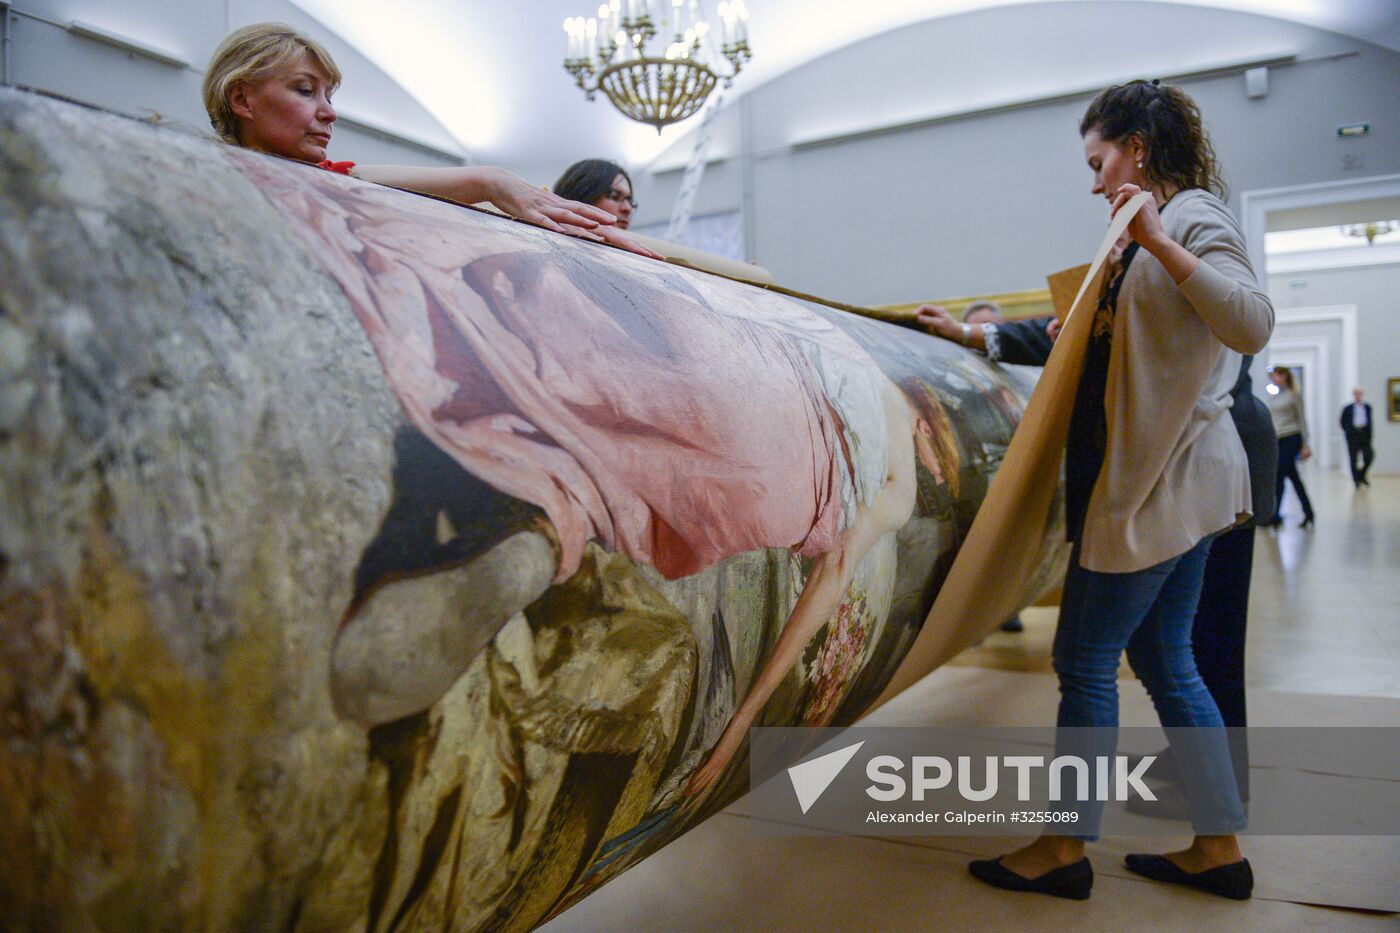 Dismantling and replacement of Frina at Poseidon's Festival painting at Russian Museum